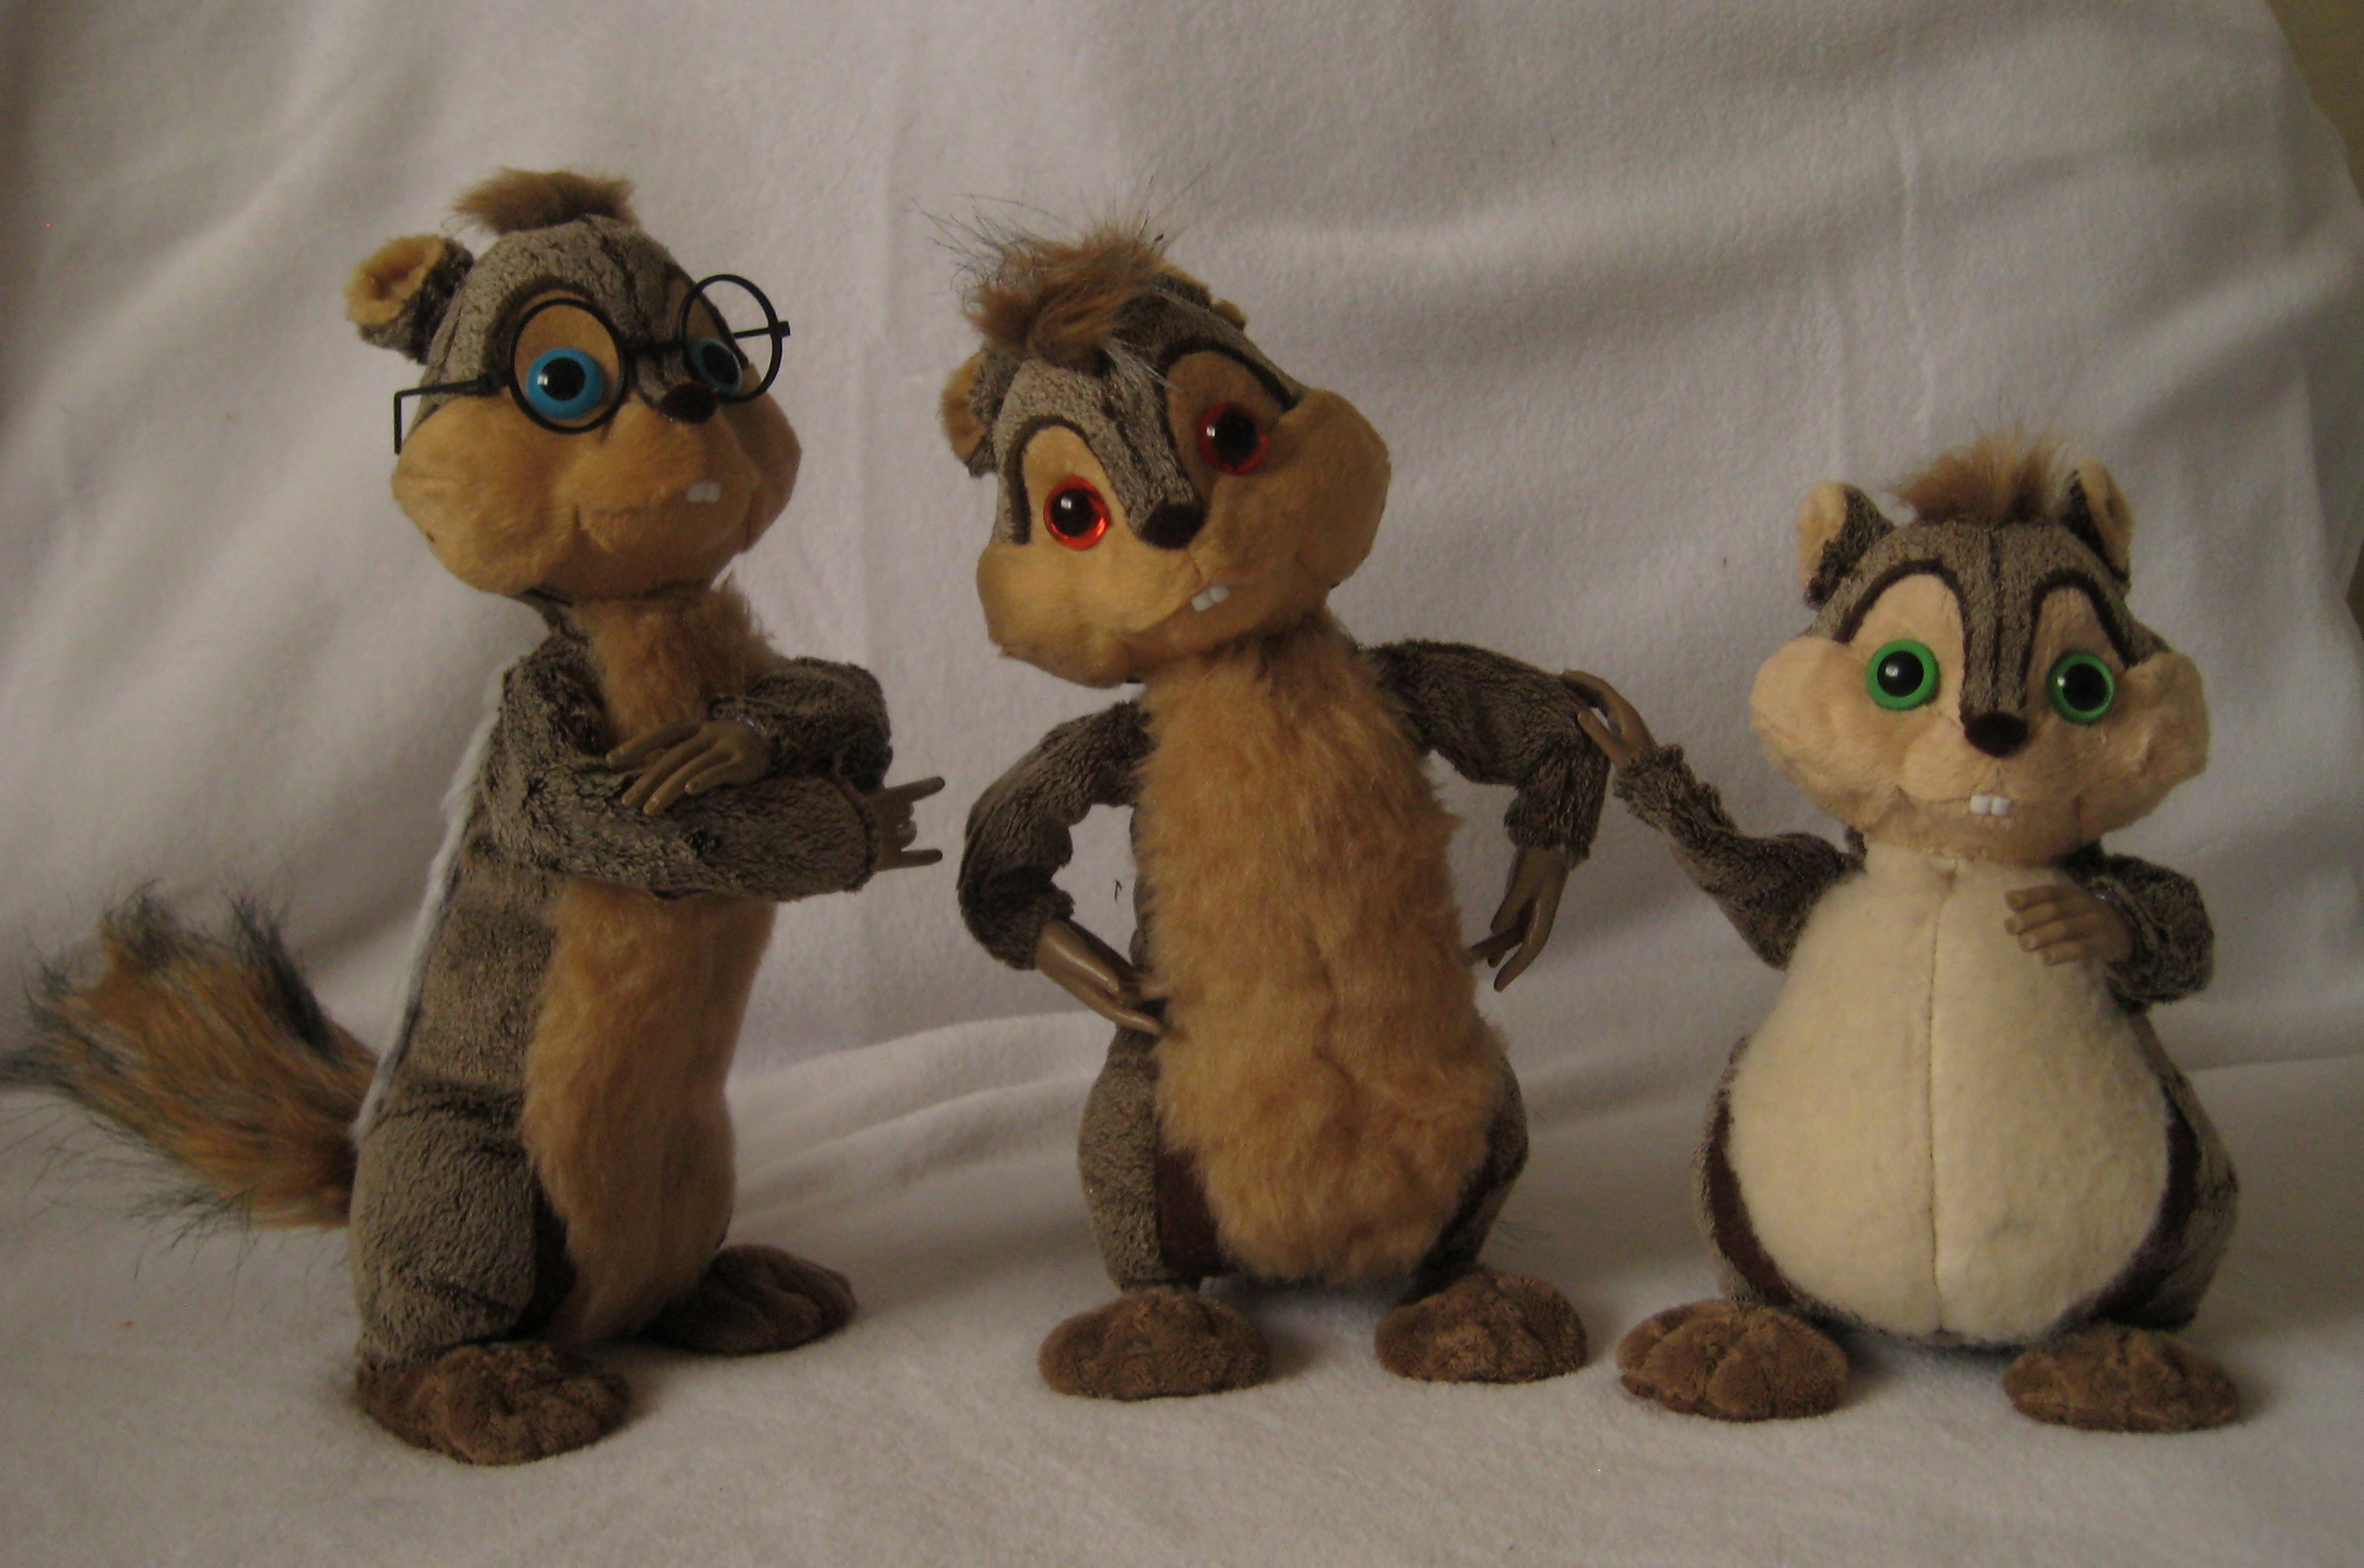 CHIPWRECKED Film, poseable stuffy stand-ins for the chipmunks